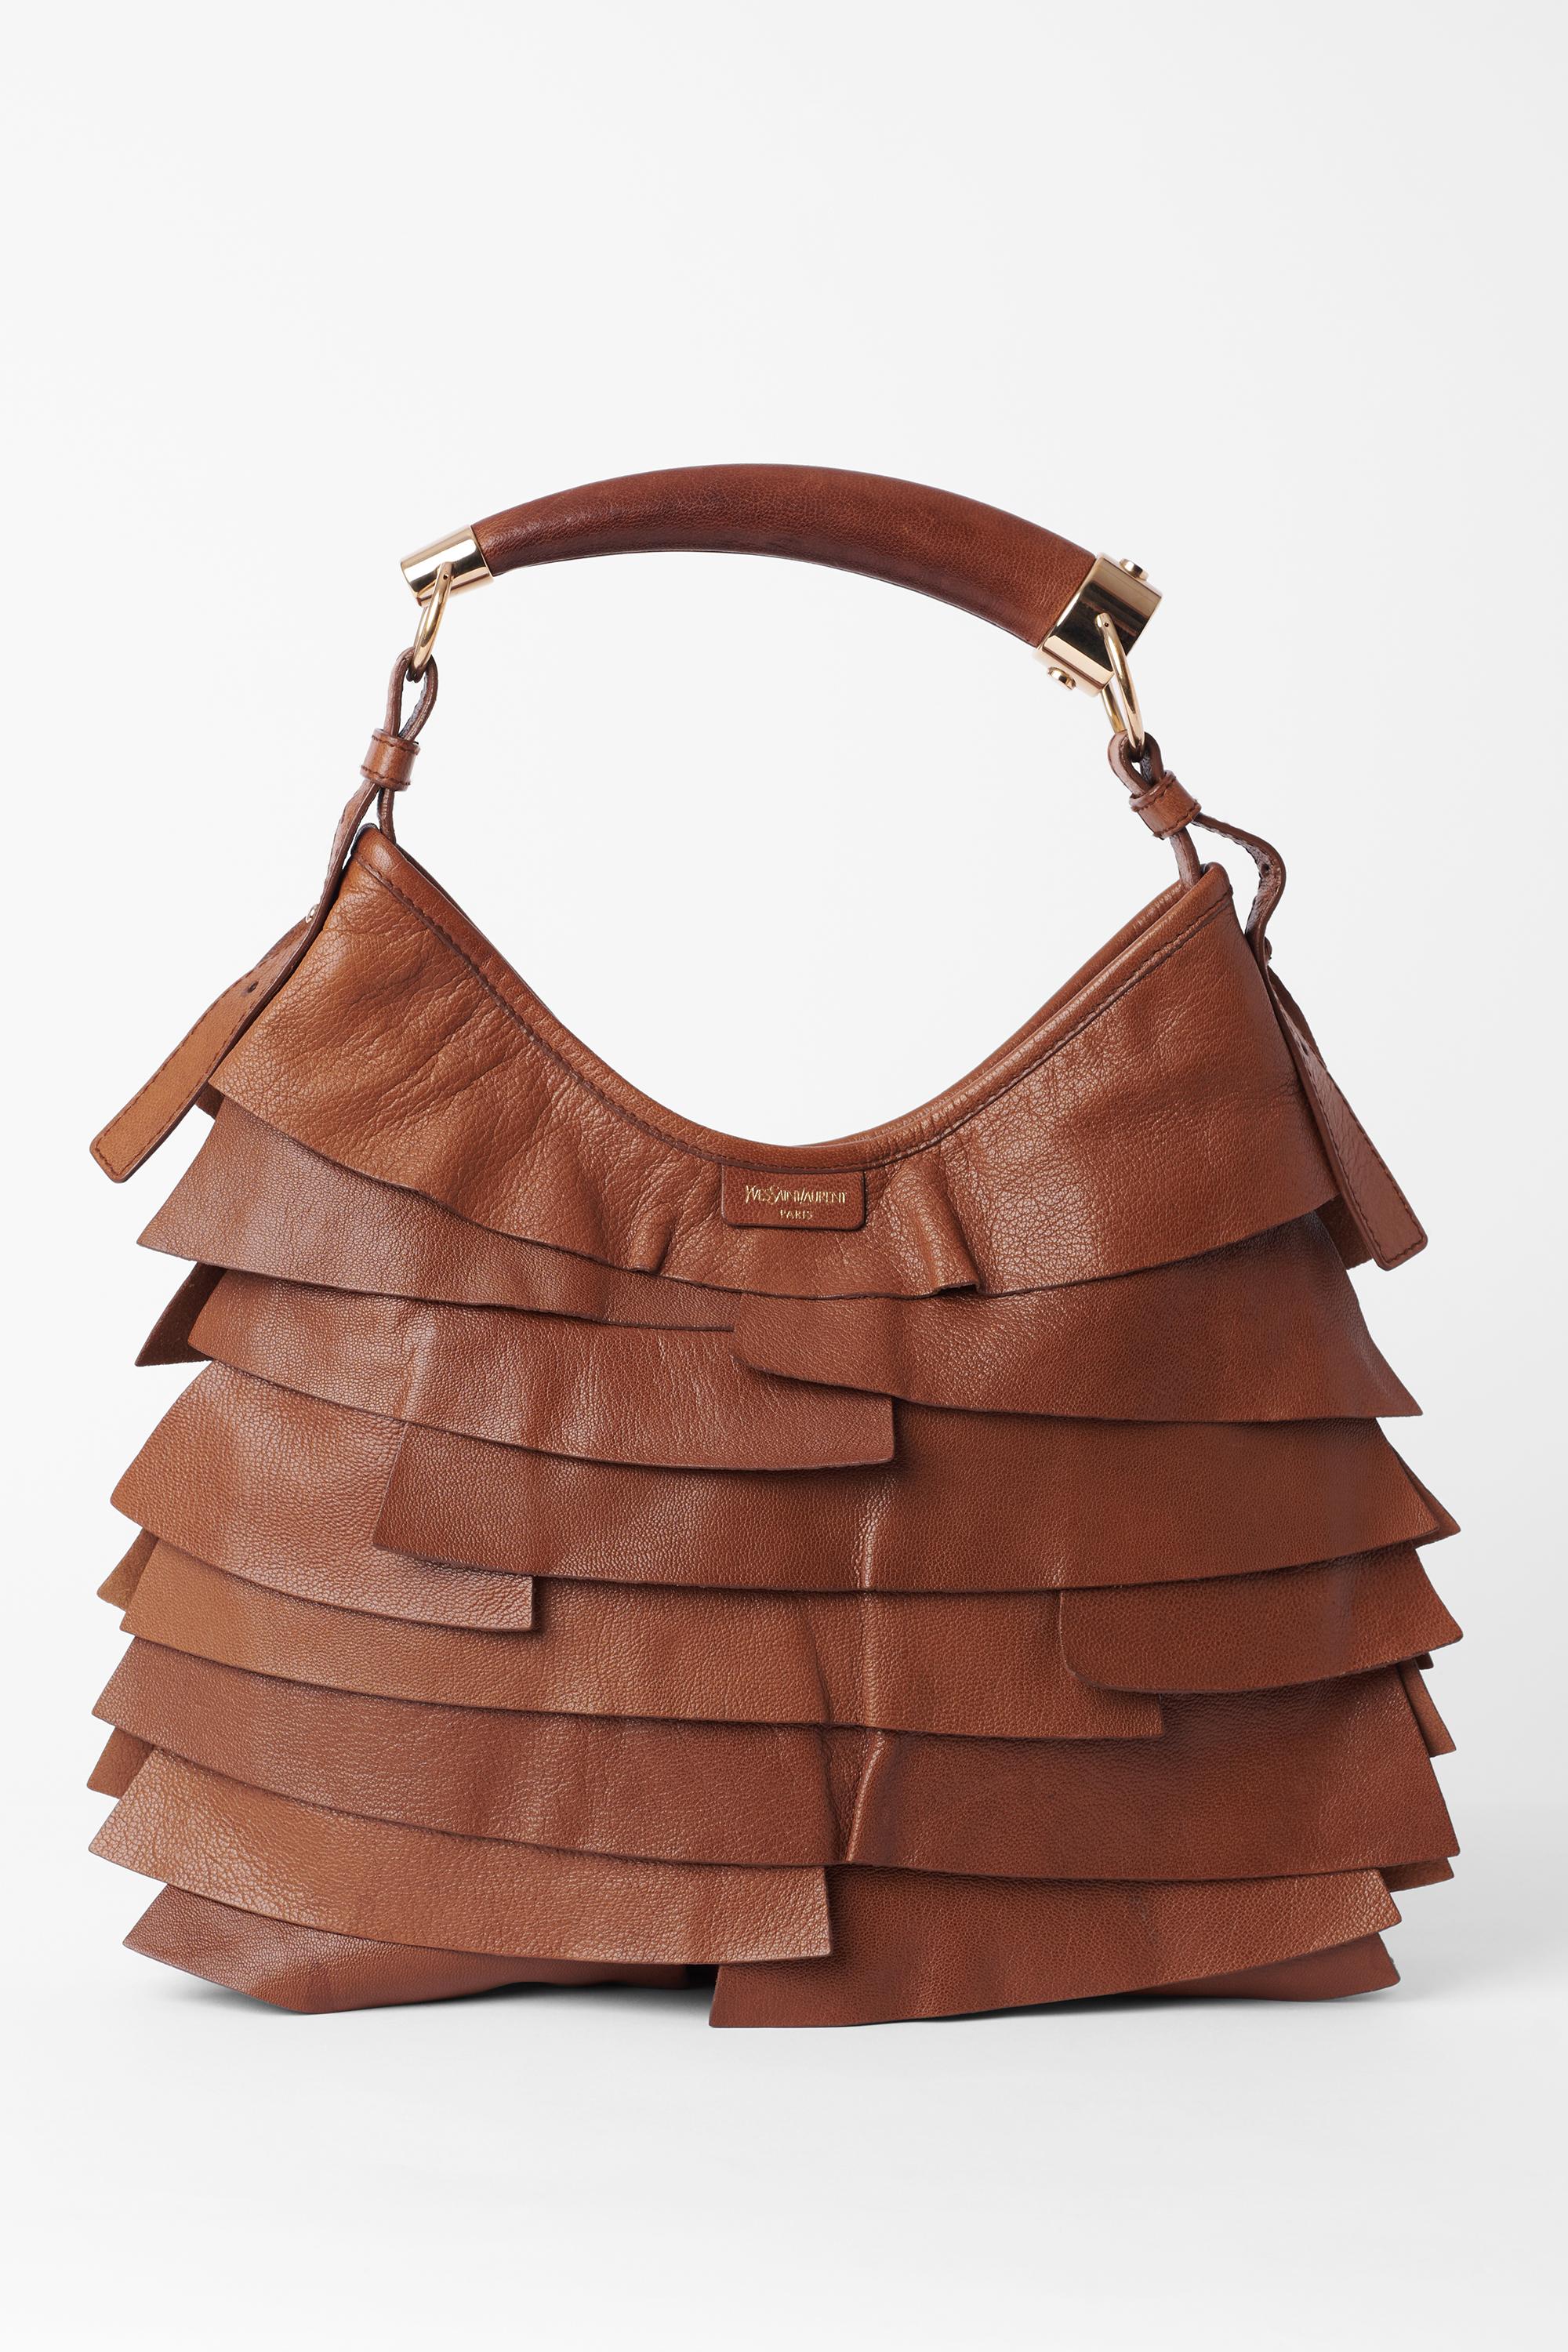 Vintage F/W 2004 Chocolate Brown St Tropez Ruffled Bag In Excellent Condition For Sale In London, GB